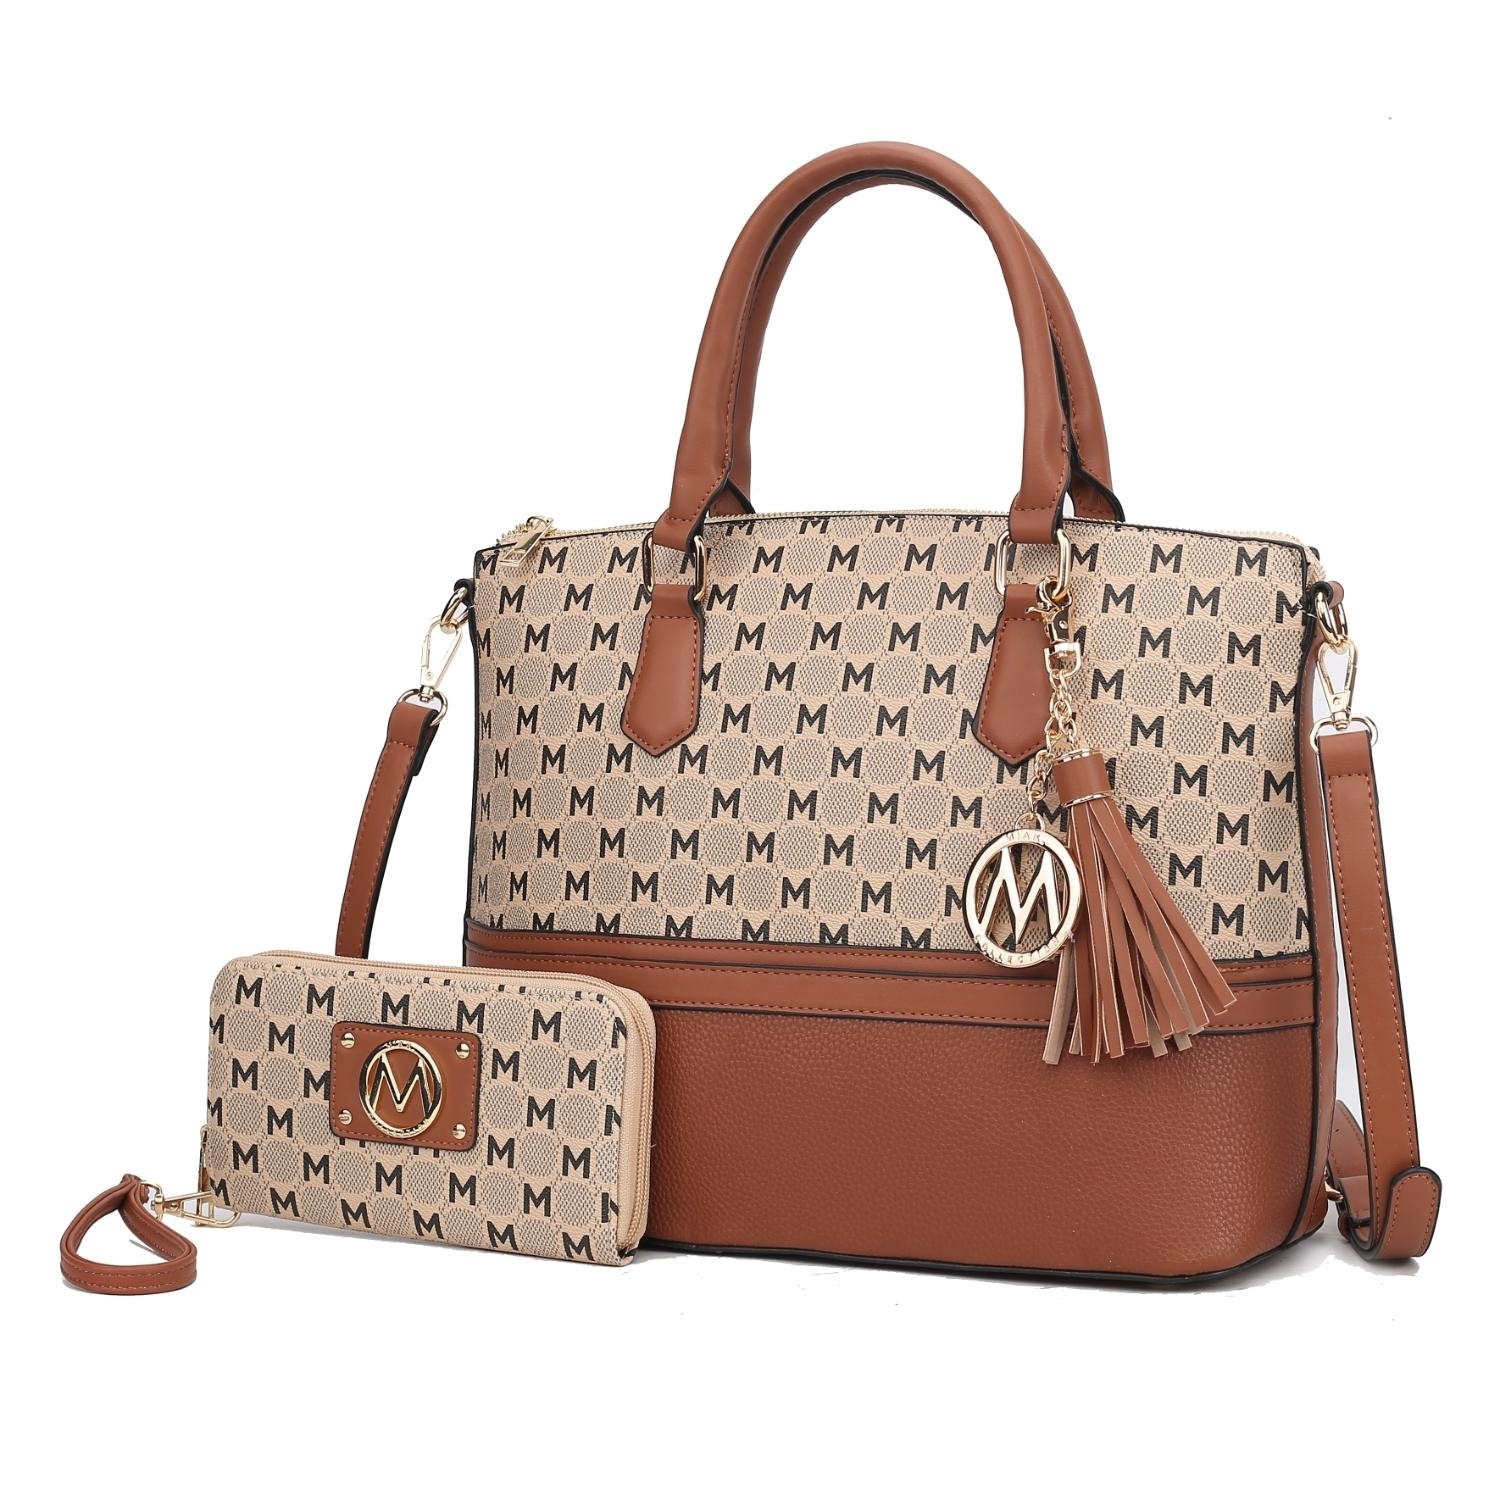 MKF Collection Saylor Circular M Emblem Print Women's Tote Bag With Matching Wristlet Wallet 2 Pieces By Mia K - Cognac